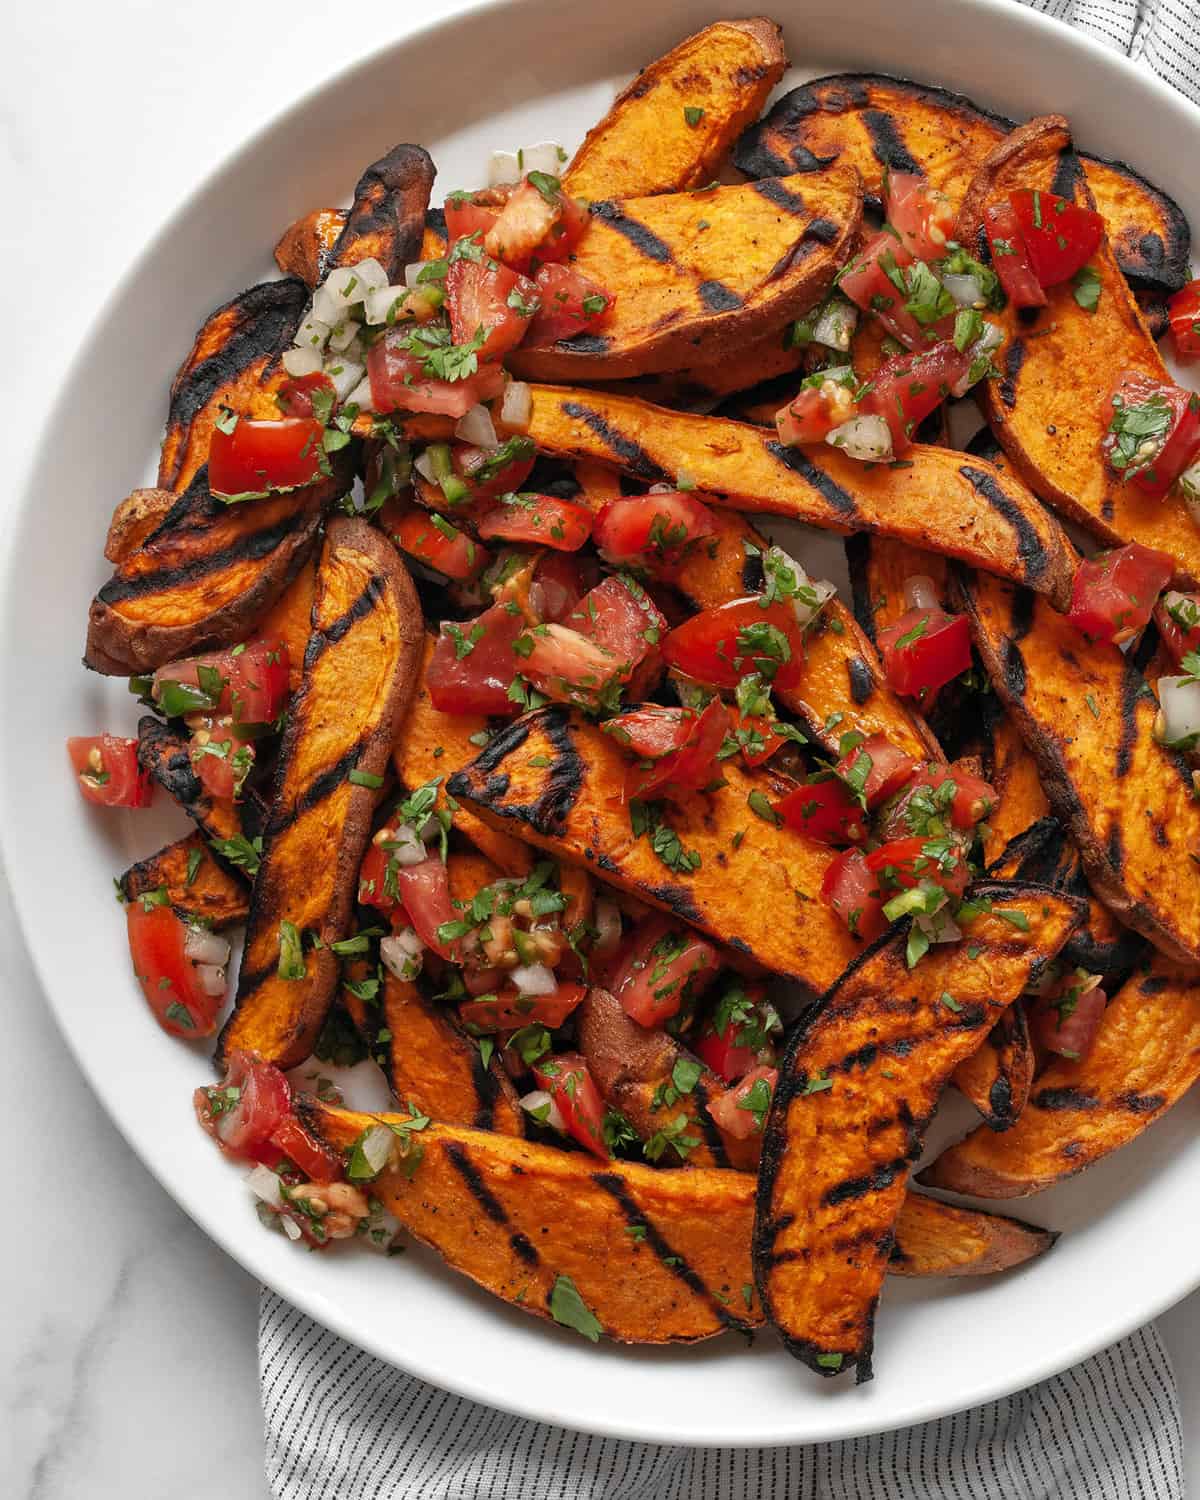 Sweet potatoes topped with pico de gallo on a plate.